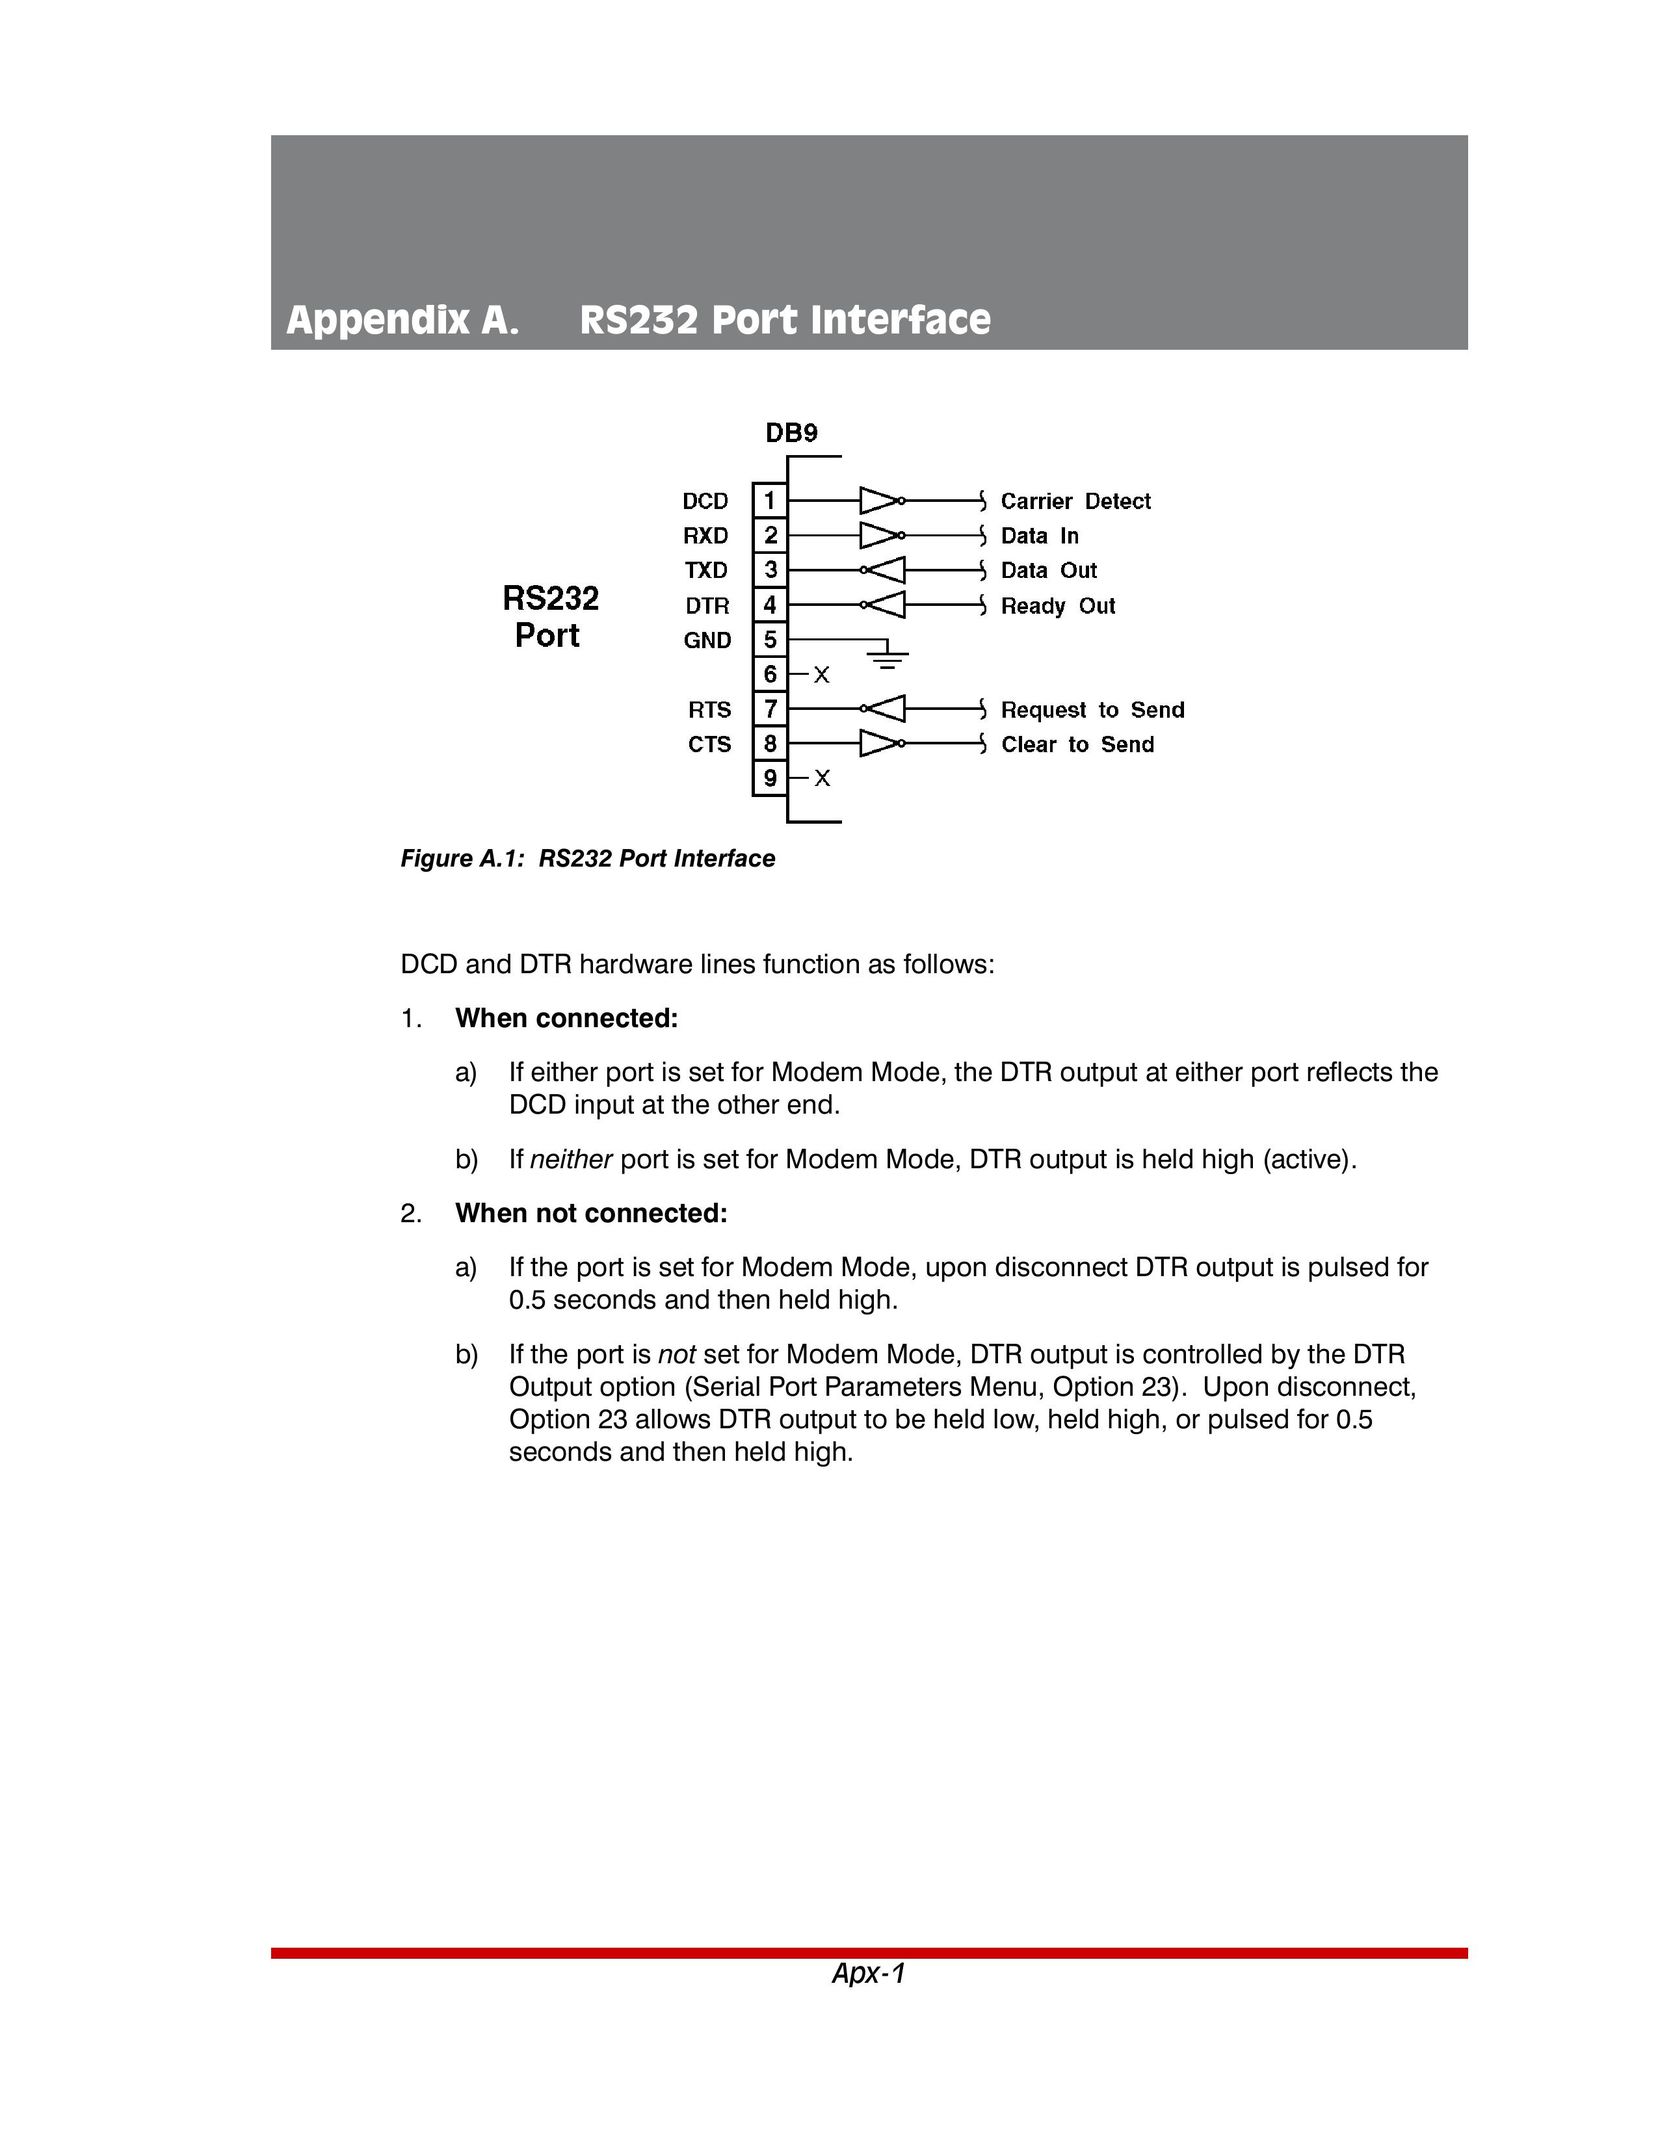 Western Telematic RSM-8 Video Gaming Accessories User Manual (Page 113)